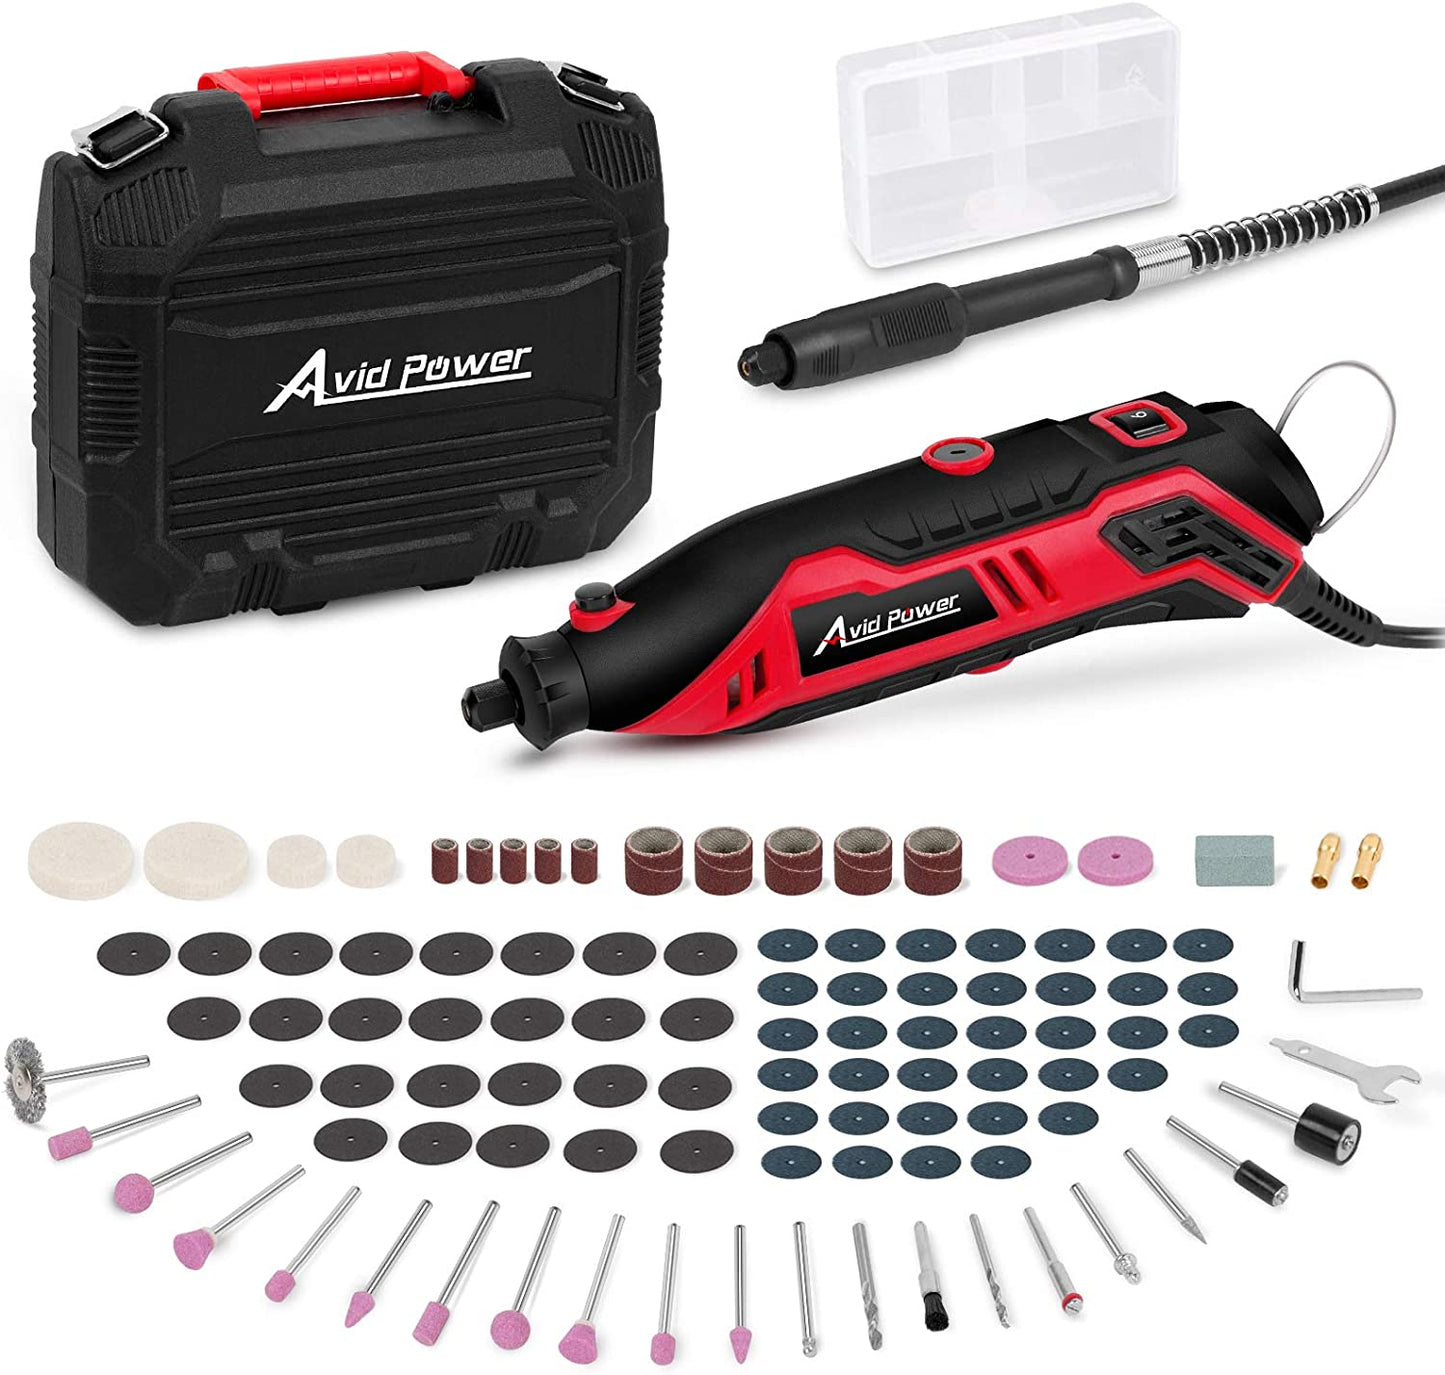 Rotary Tool with Flex Shaft 1.0 Amp Electric Rotary Tool, 6 Variable Speeds, 107 Pieces Rotary Tool Accessories & Carrying Case for Grinding, Cutting, Carving and Sanding - Red